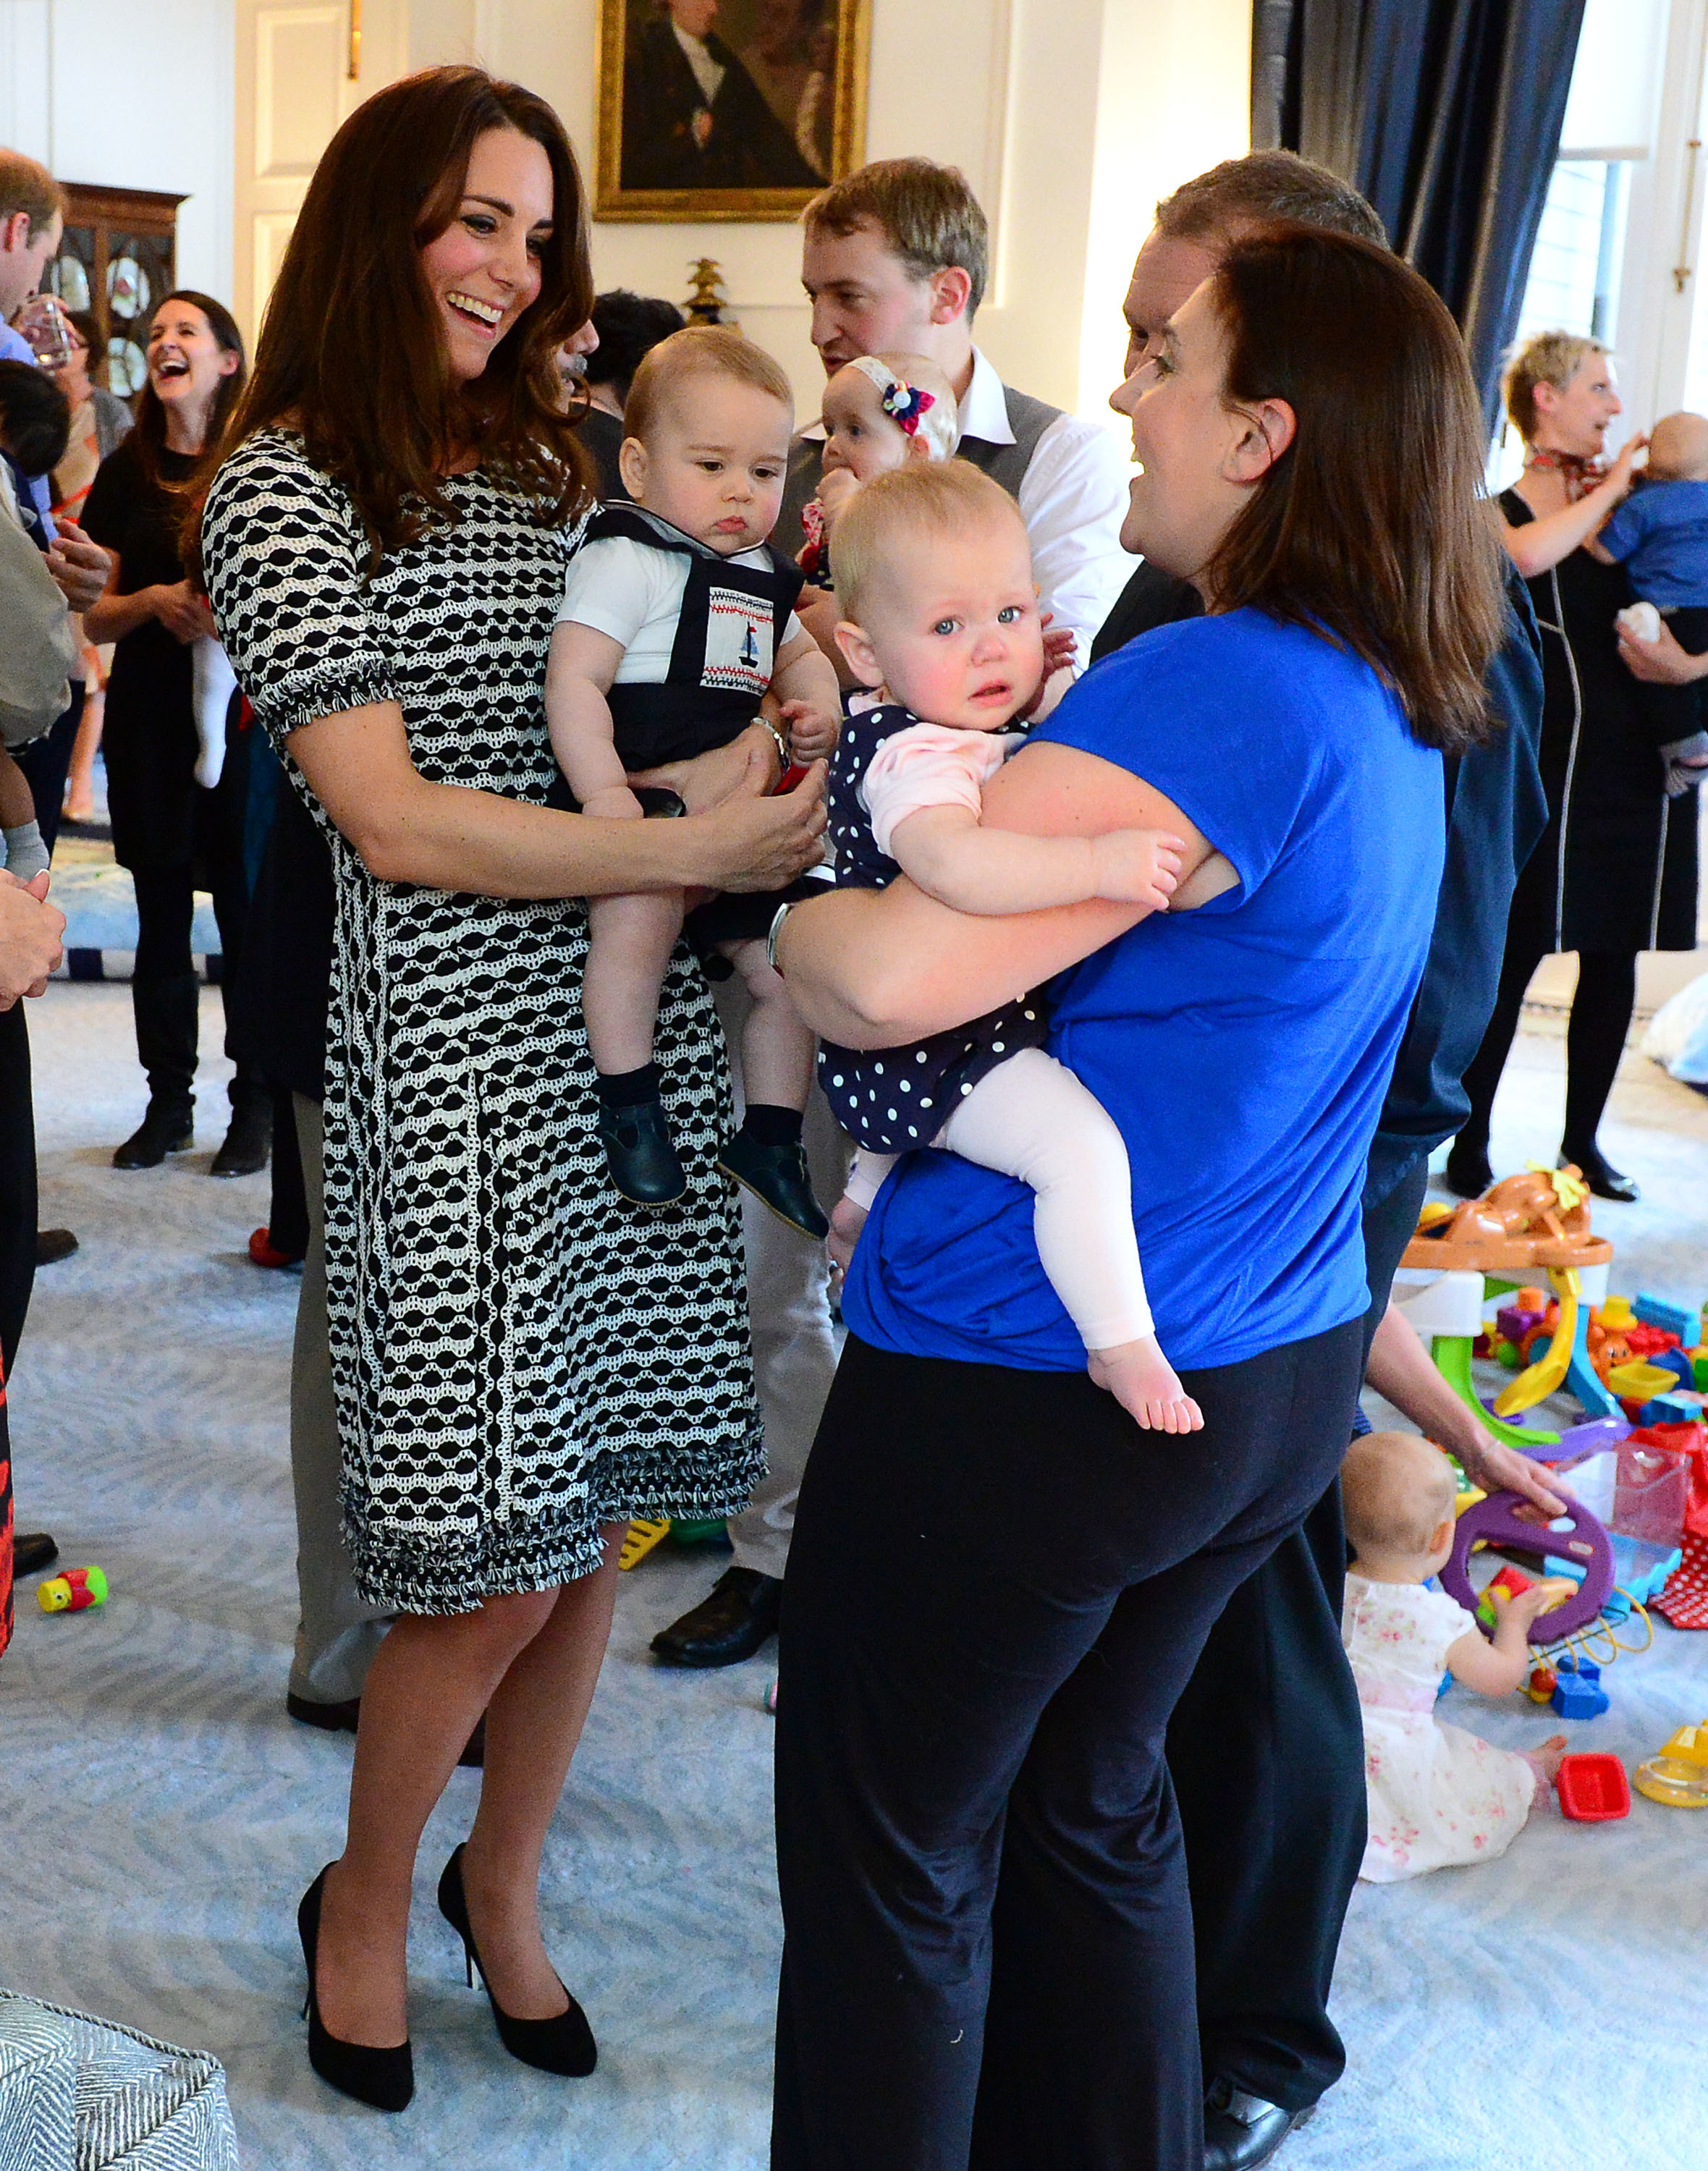 <p><a href="https://www.wonderwall.com/celebrity/profiles/overview/duchess-kate-1356.article">Duchess Kate</a> and Prince George of Cambridge attended a Plunkett's Parent's Group playdate at Government House in Wellington, New Zealand, on April 9, 2014, during a royal tour Down Under.</p>